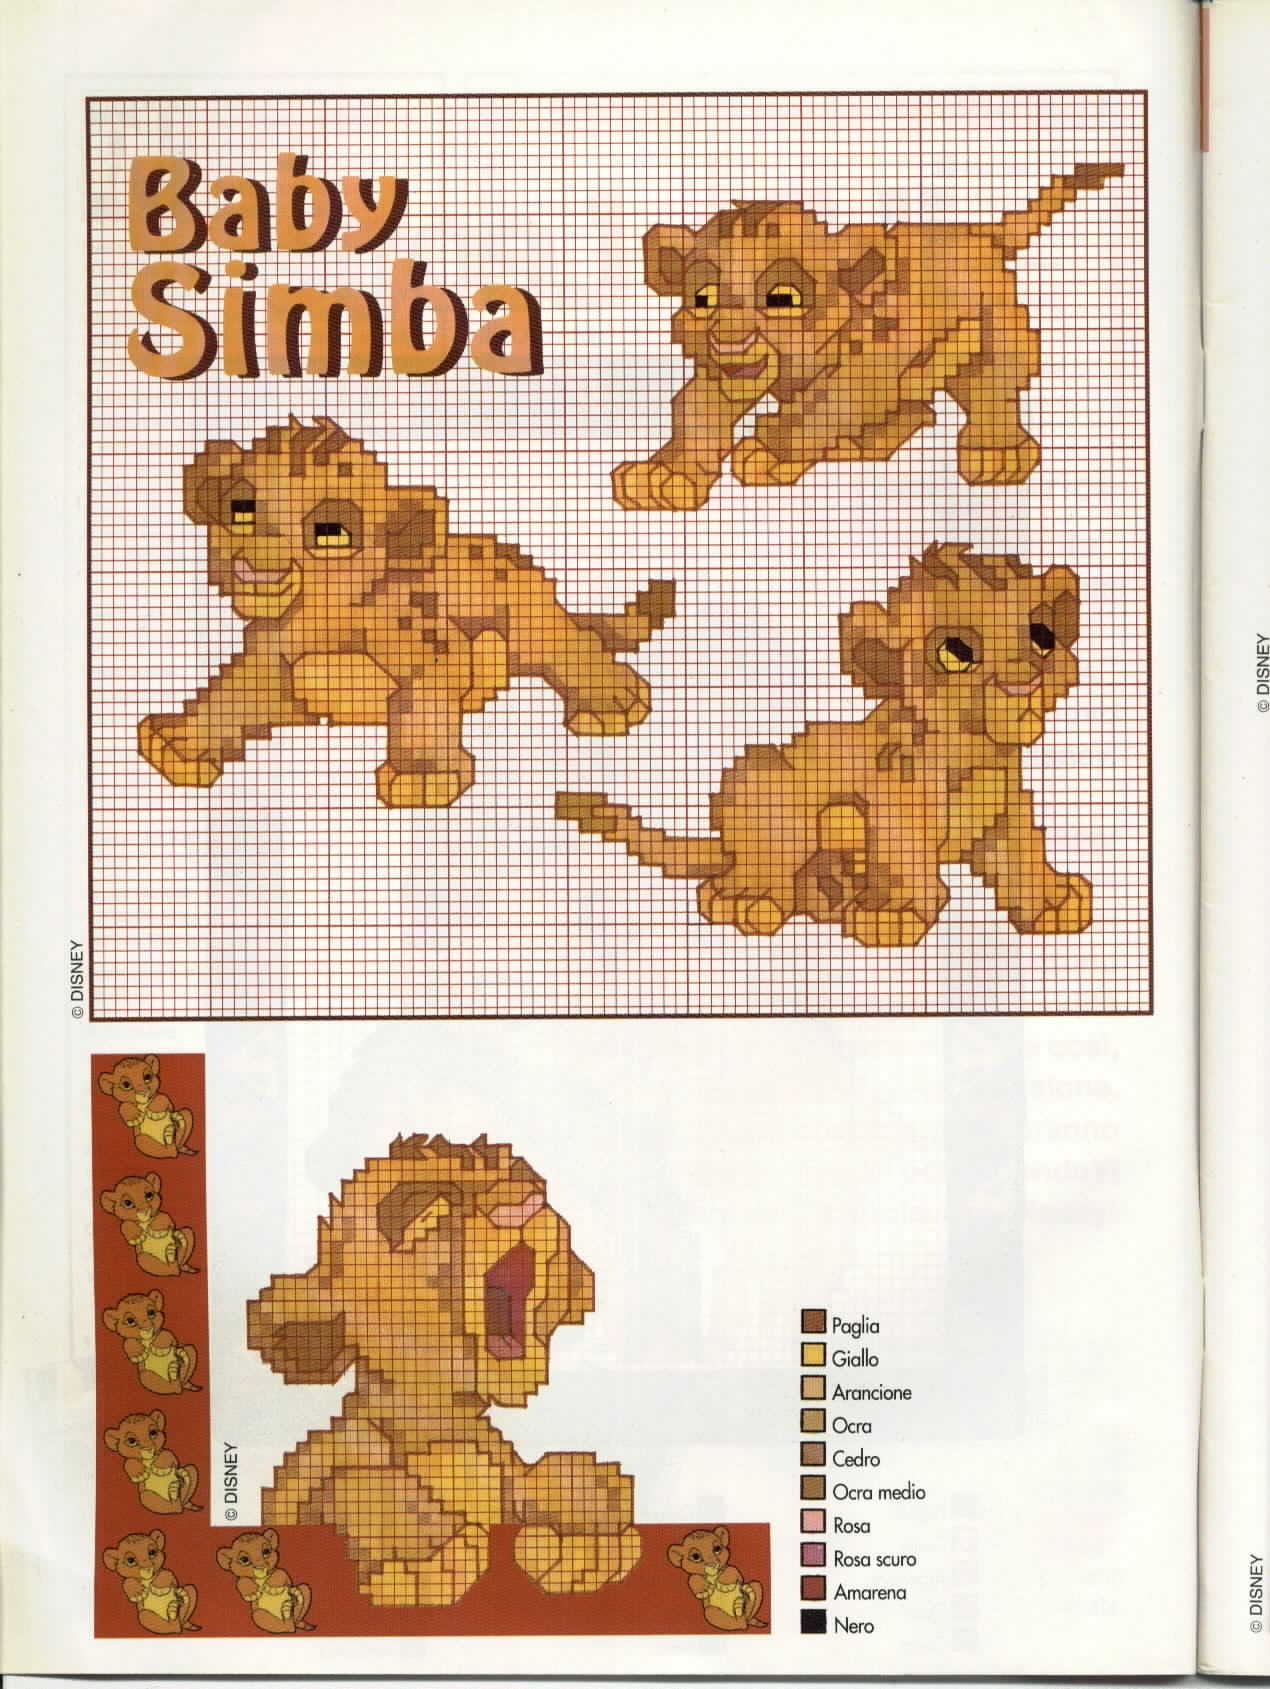 Baby Simba from The Lion King